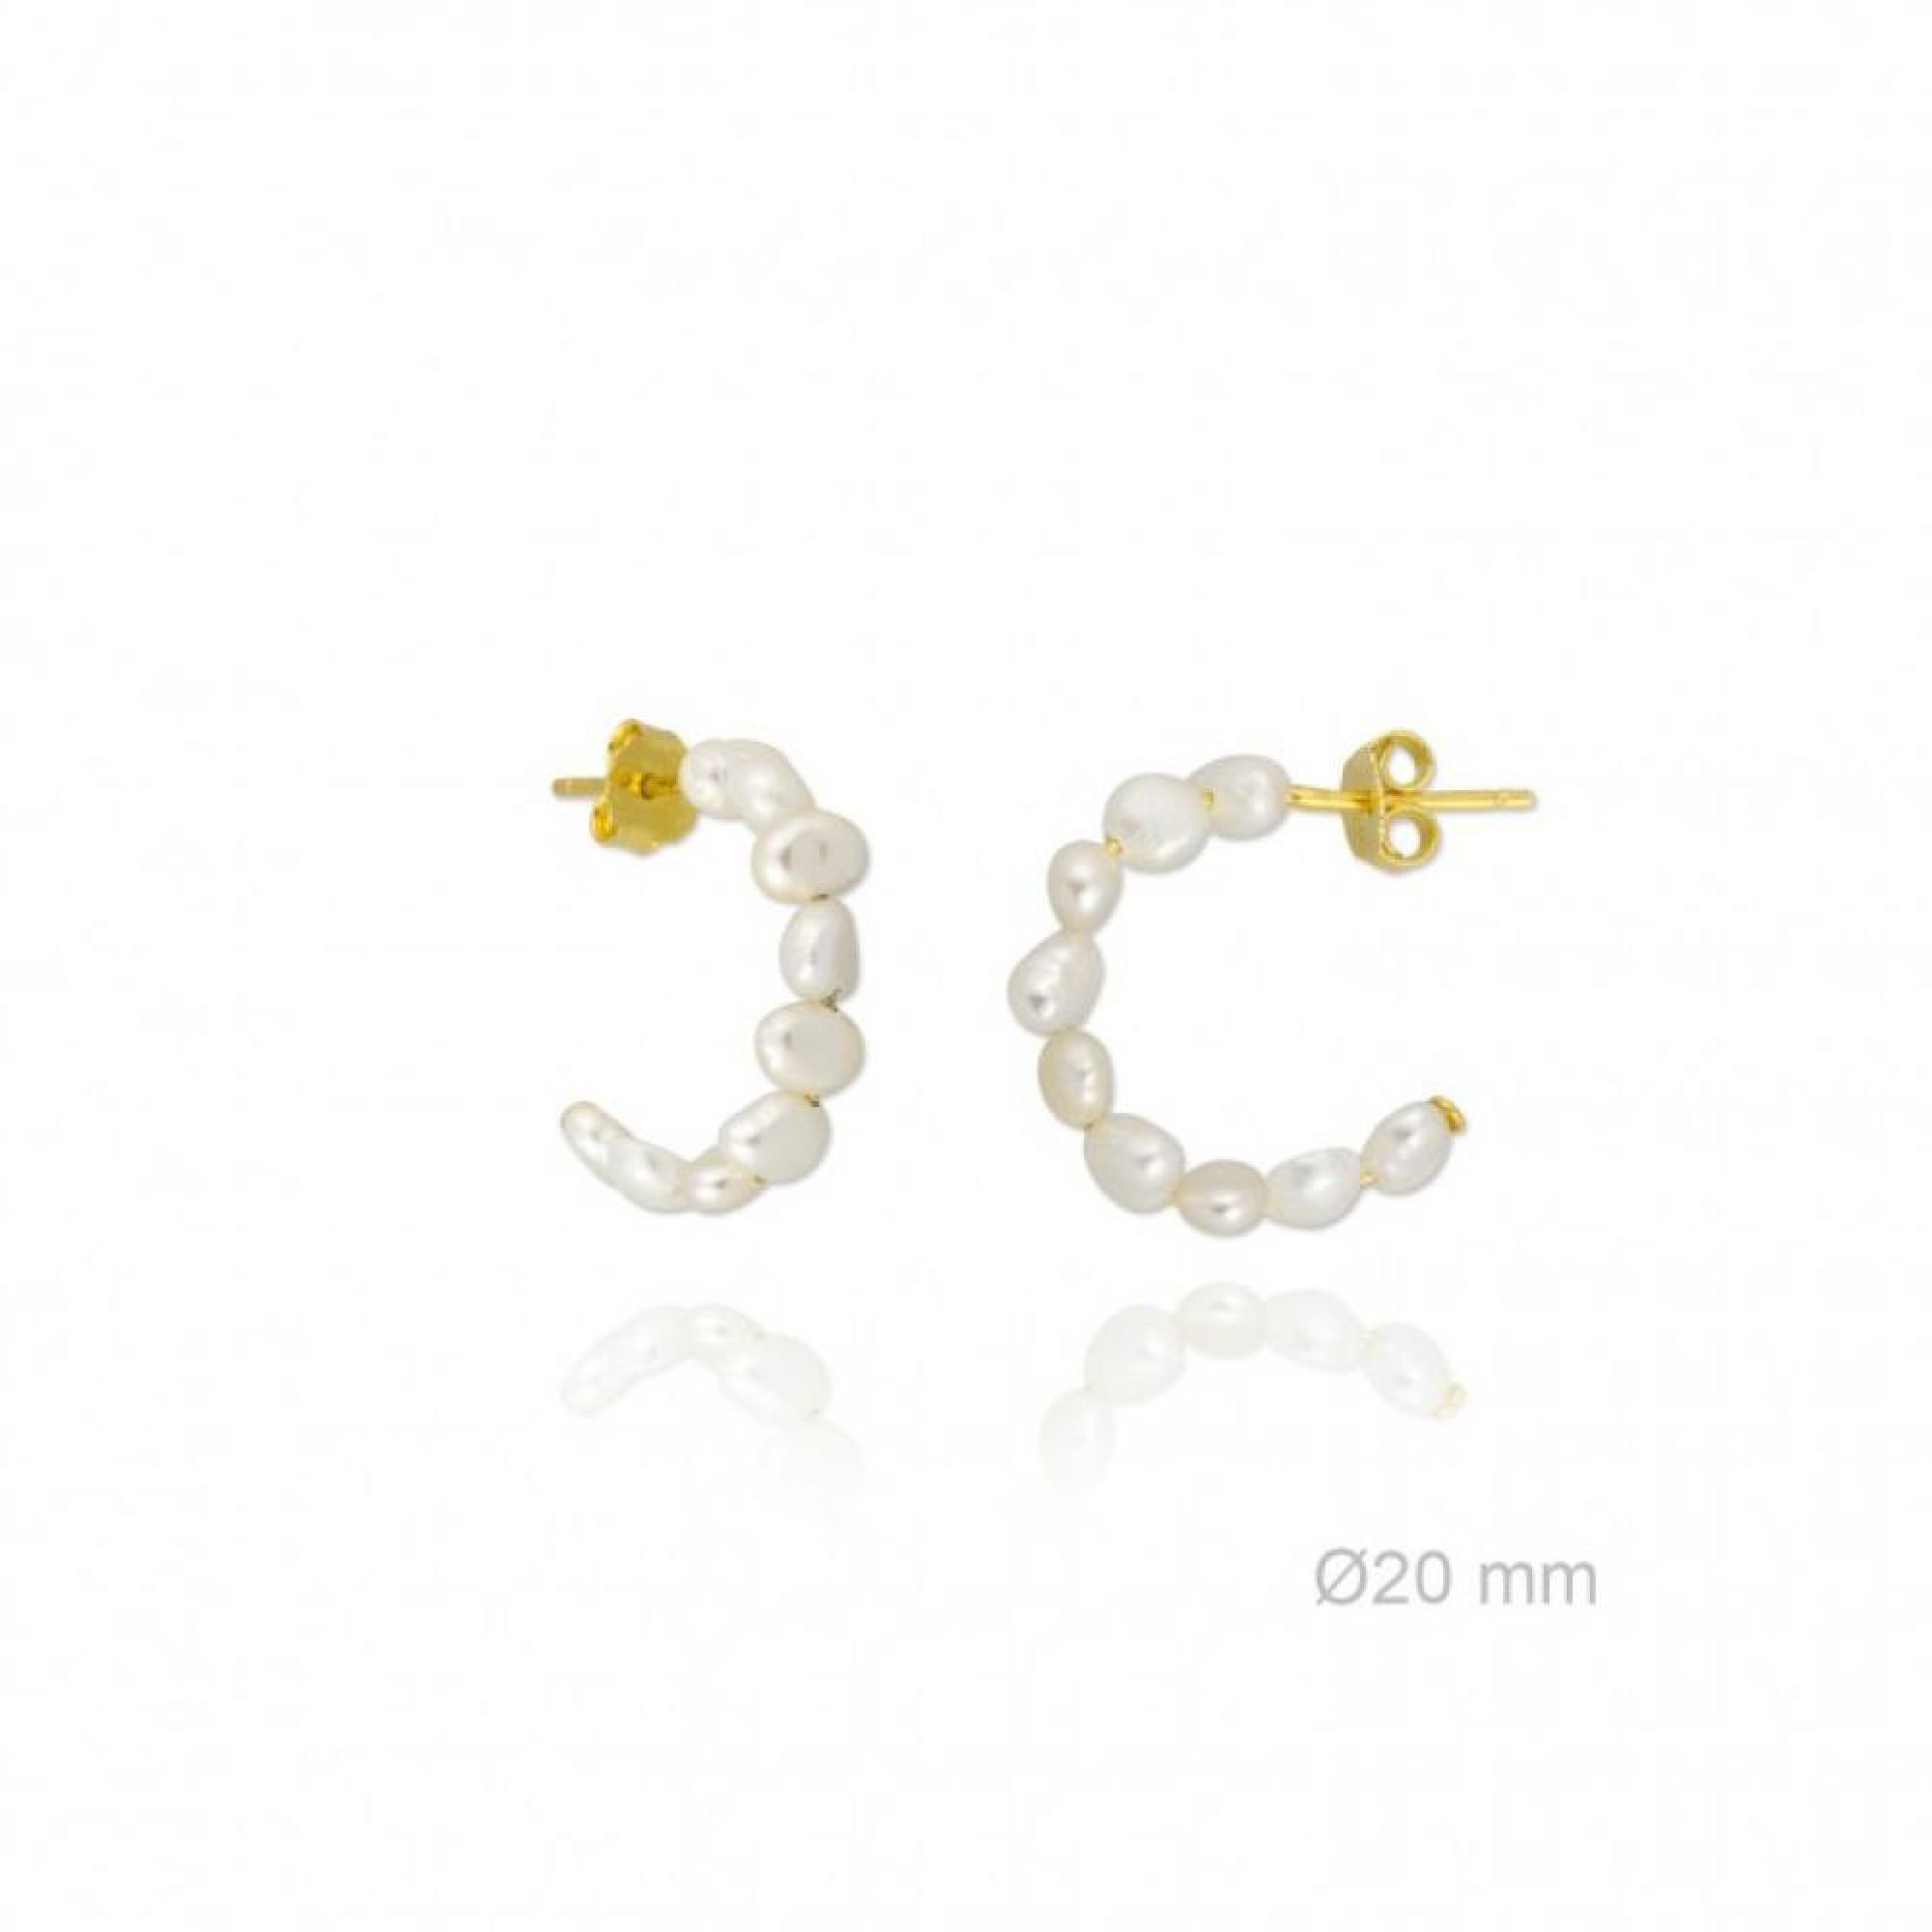 Gold plated earrings with real pearls